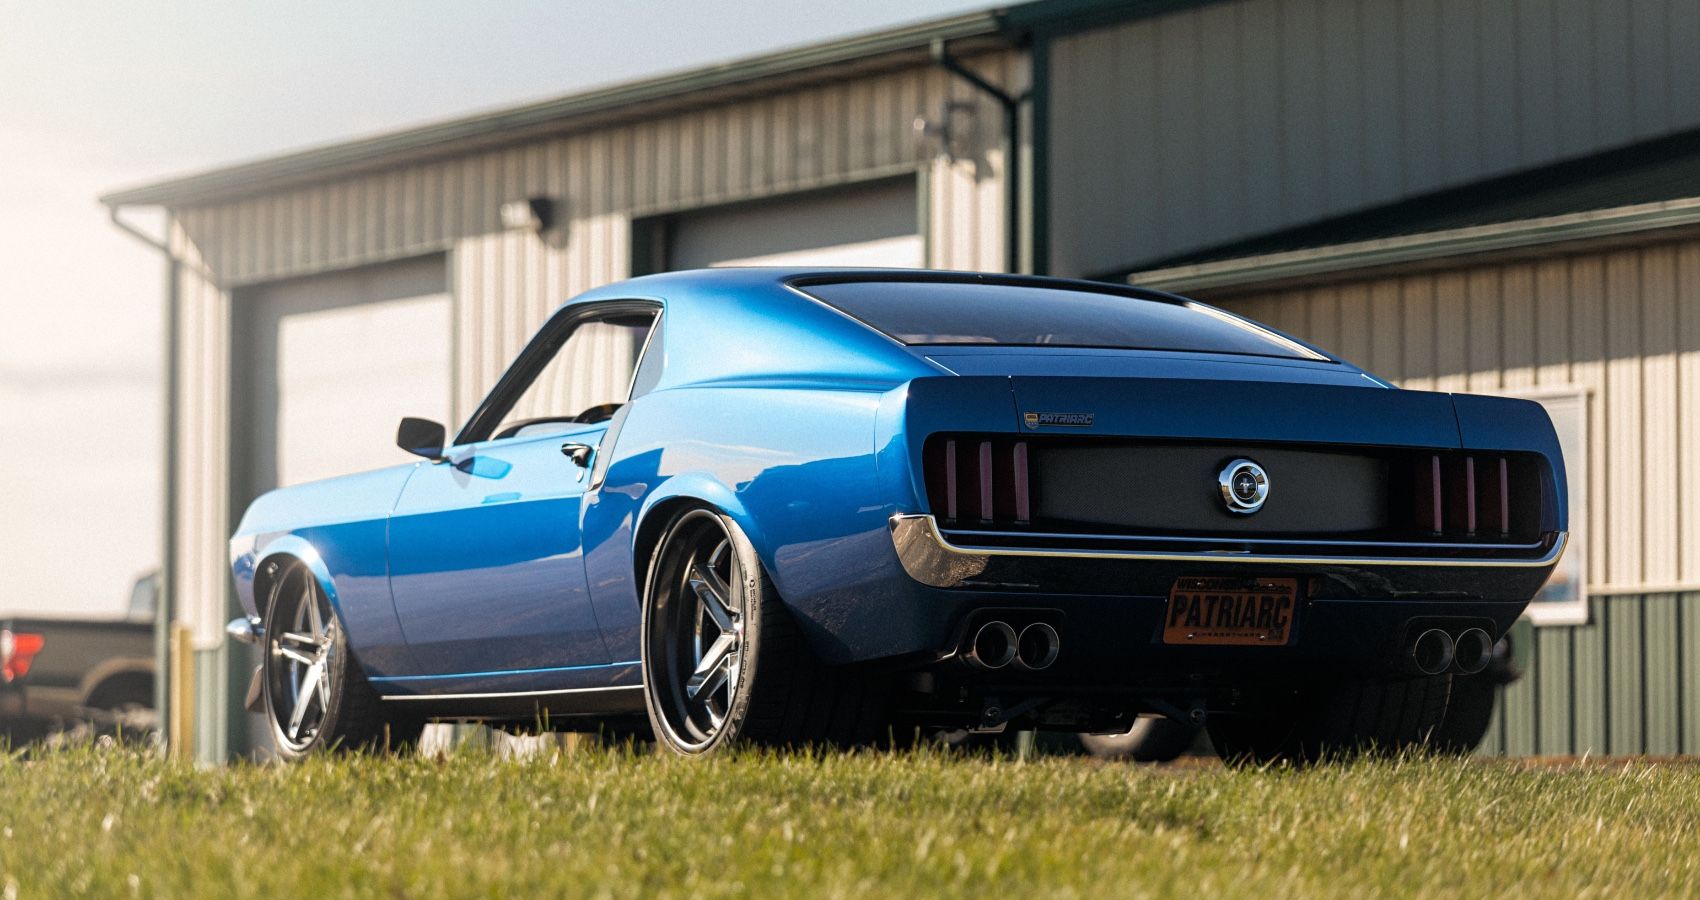 Ringbrothers PATRIARC 1969 Ford Mustang Mach 1